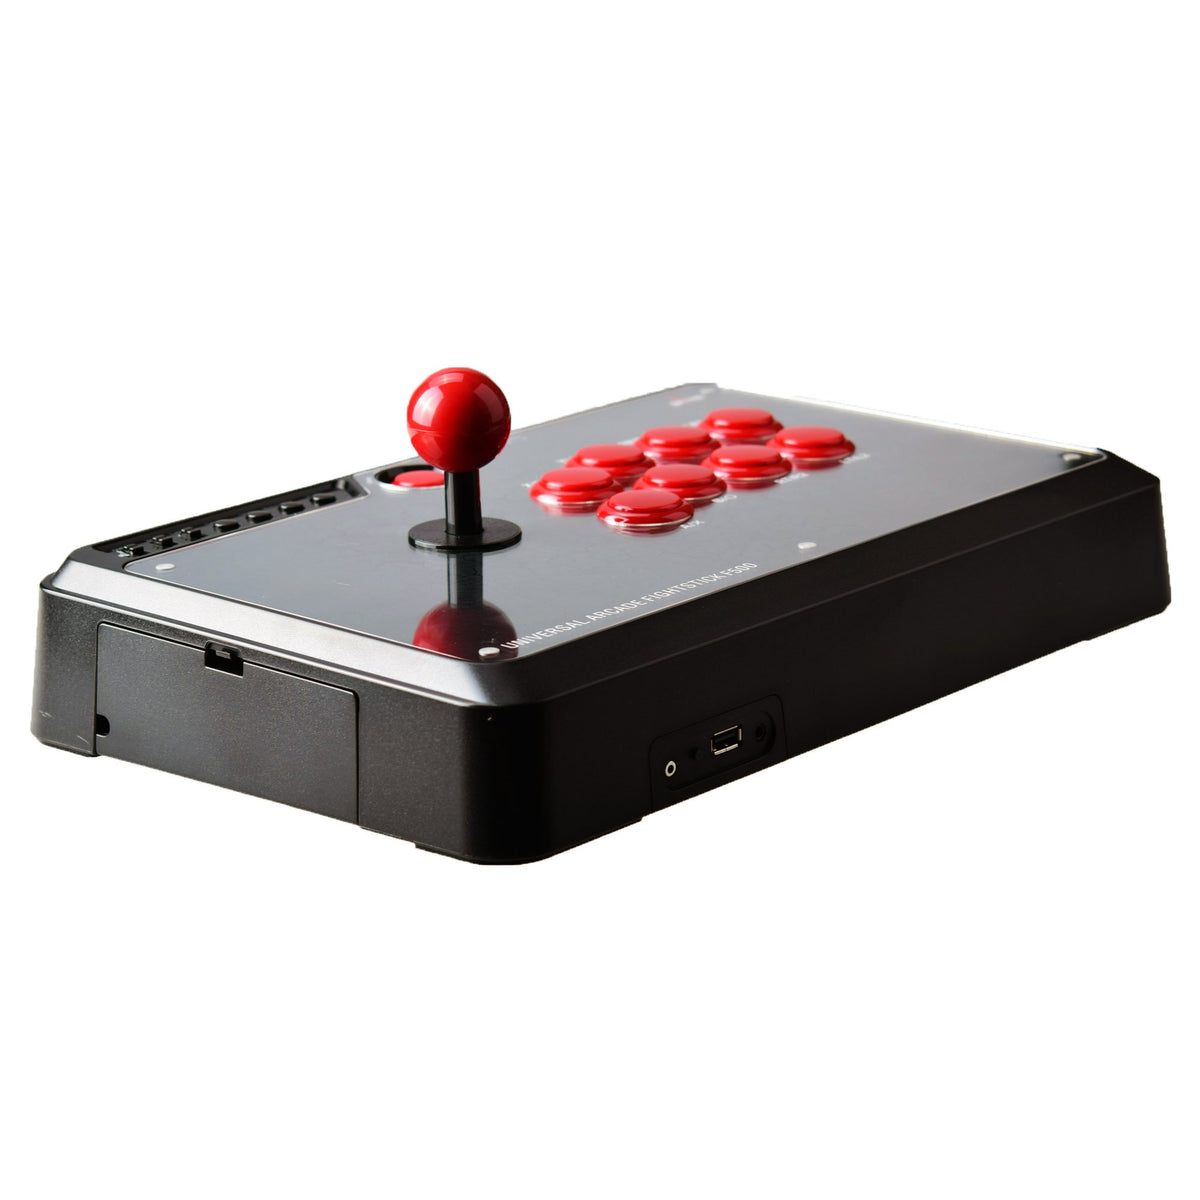 MayFlash Arcade Fightstick F500v2 for PS4 PS3 Xbox One 360 PC